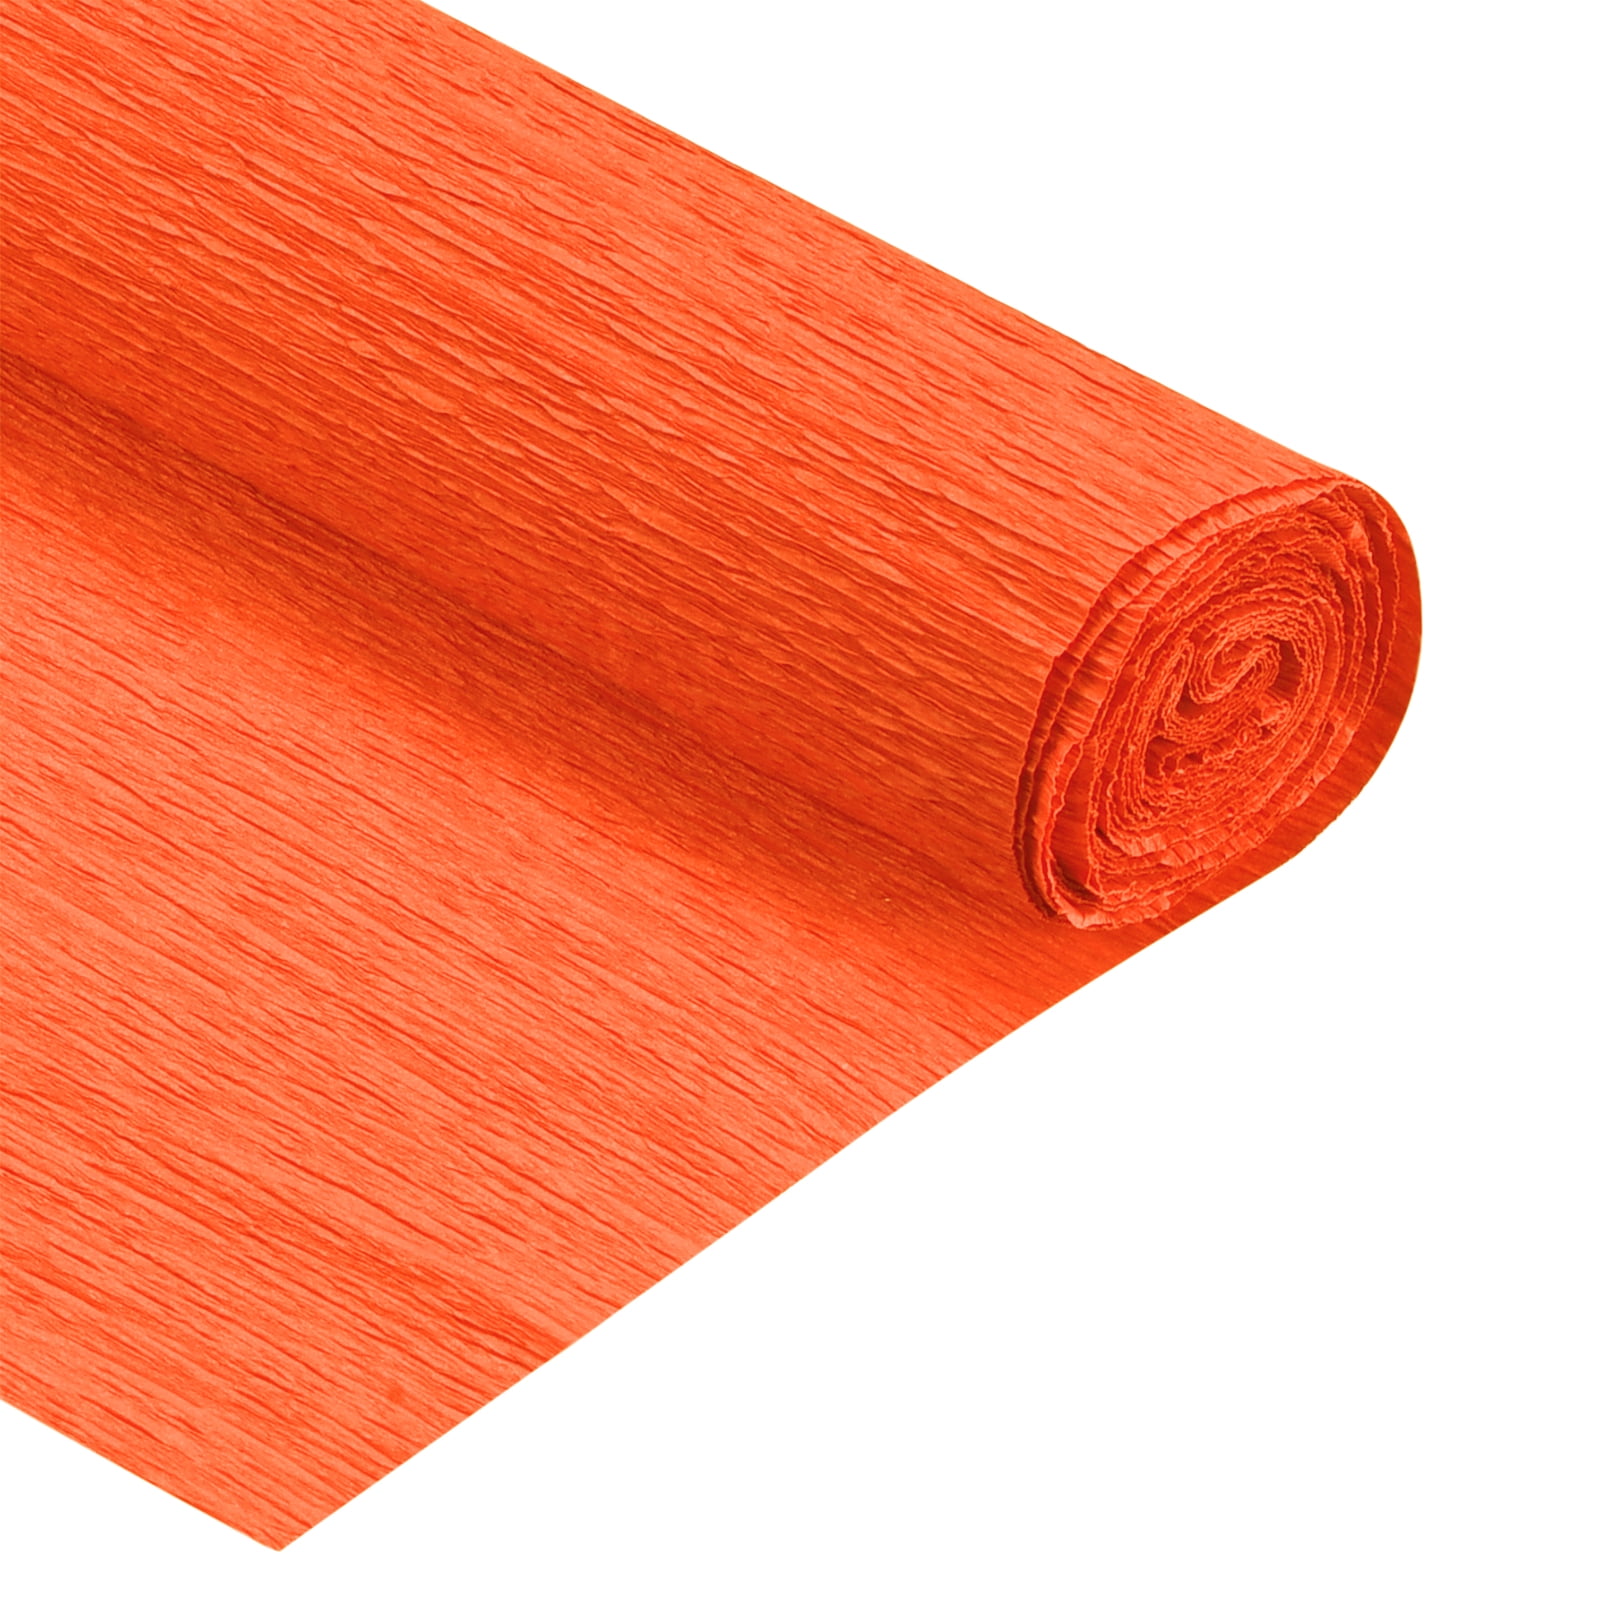 Crepe Paper Roll Crepe Paper Decoration 7.5ft Long 20 Inch Wide, Red 